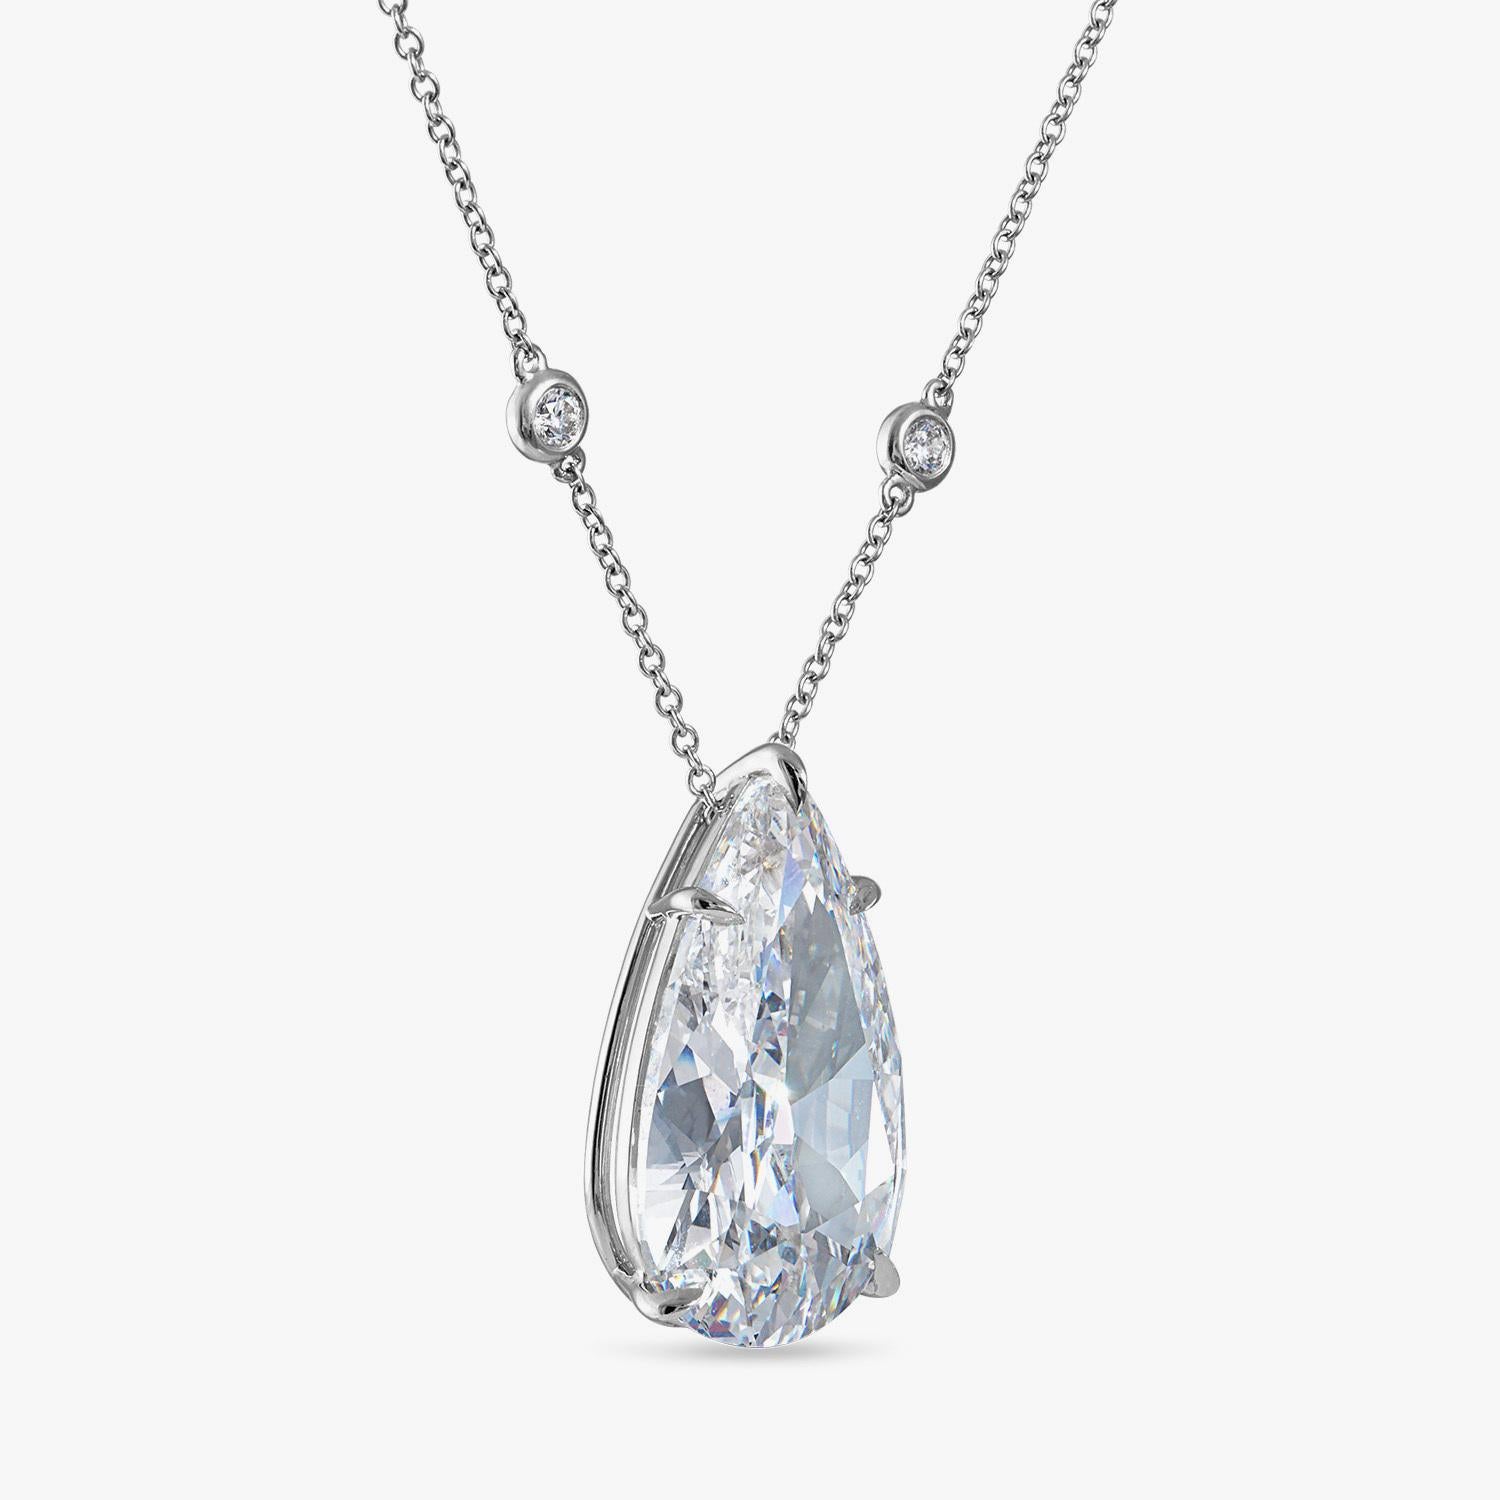 Contemporary 12.12 Carat Pear-Shaped Diamond Pendant, GIA Certified, Type IIa For Sale